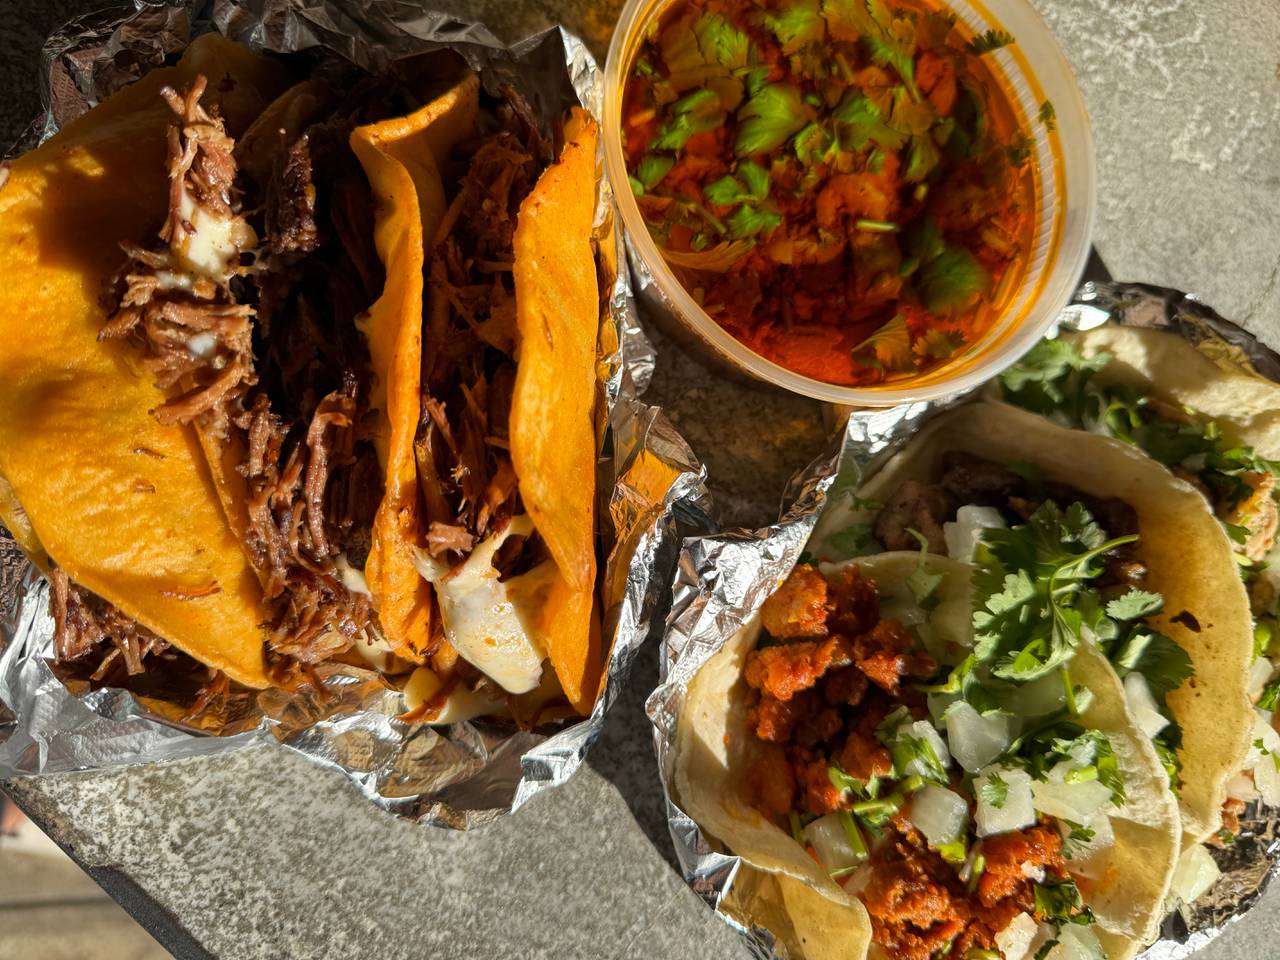 A variety of chicken, steak and chorizo tacos from Ruben's Mexican Food.